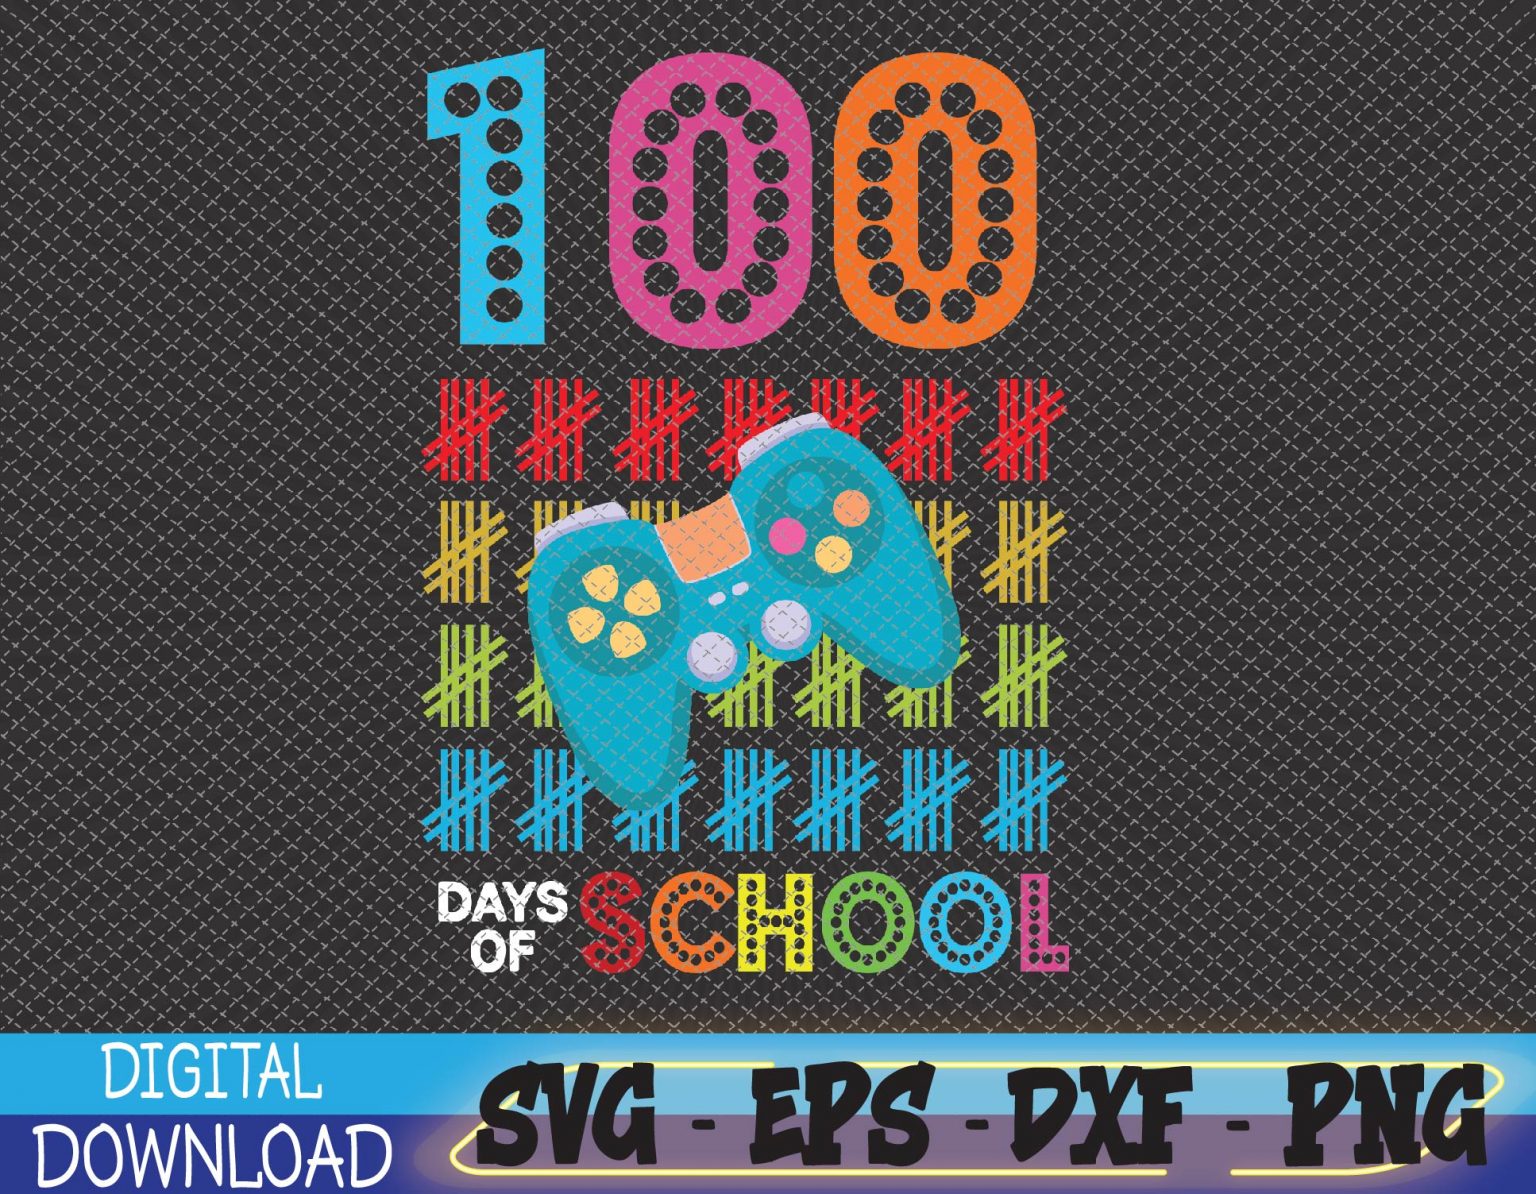 100-days-of-school-100th-day-of-school-svg-eps-png-dxf-digital